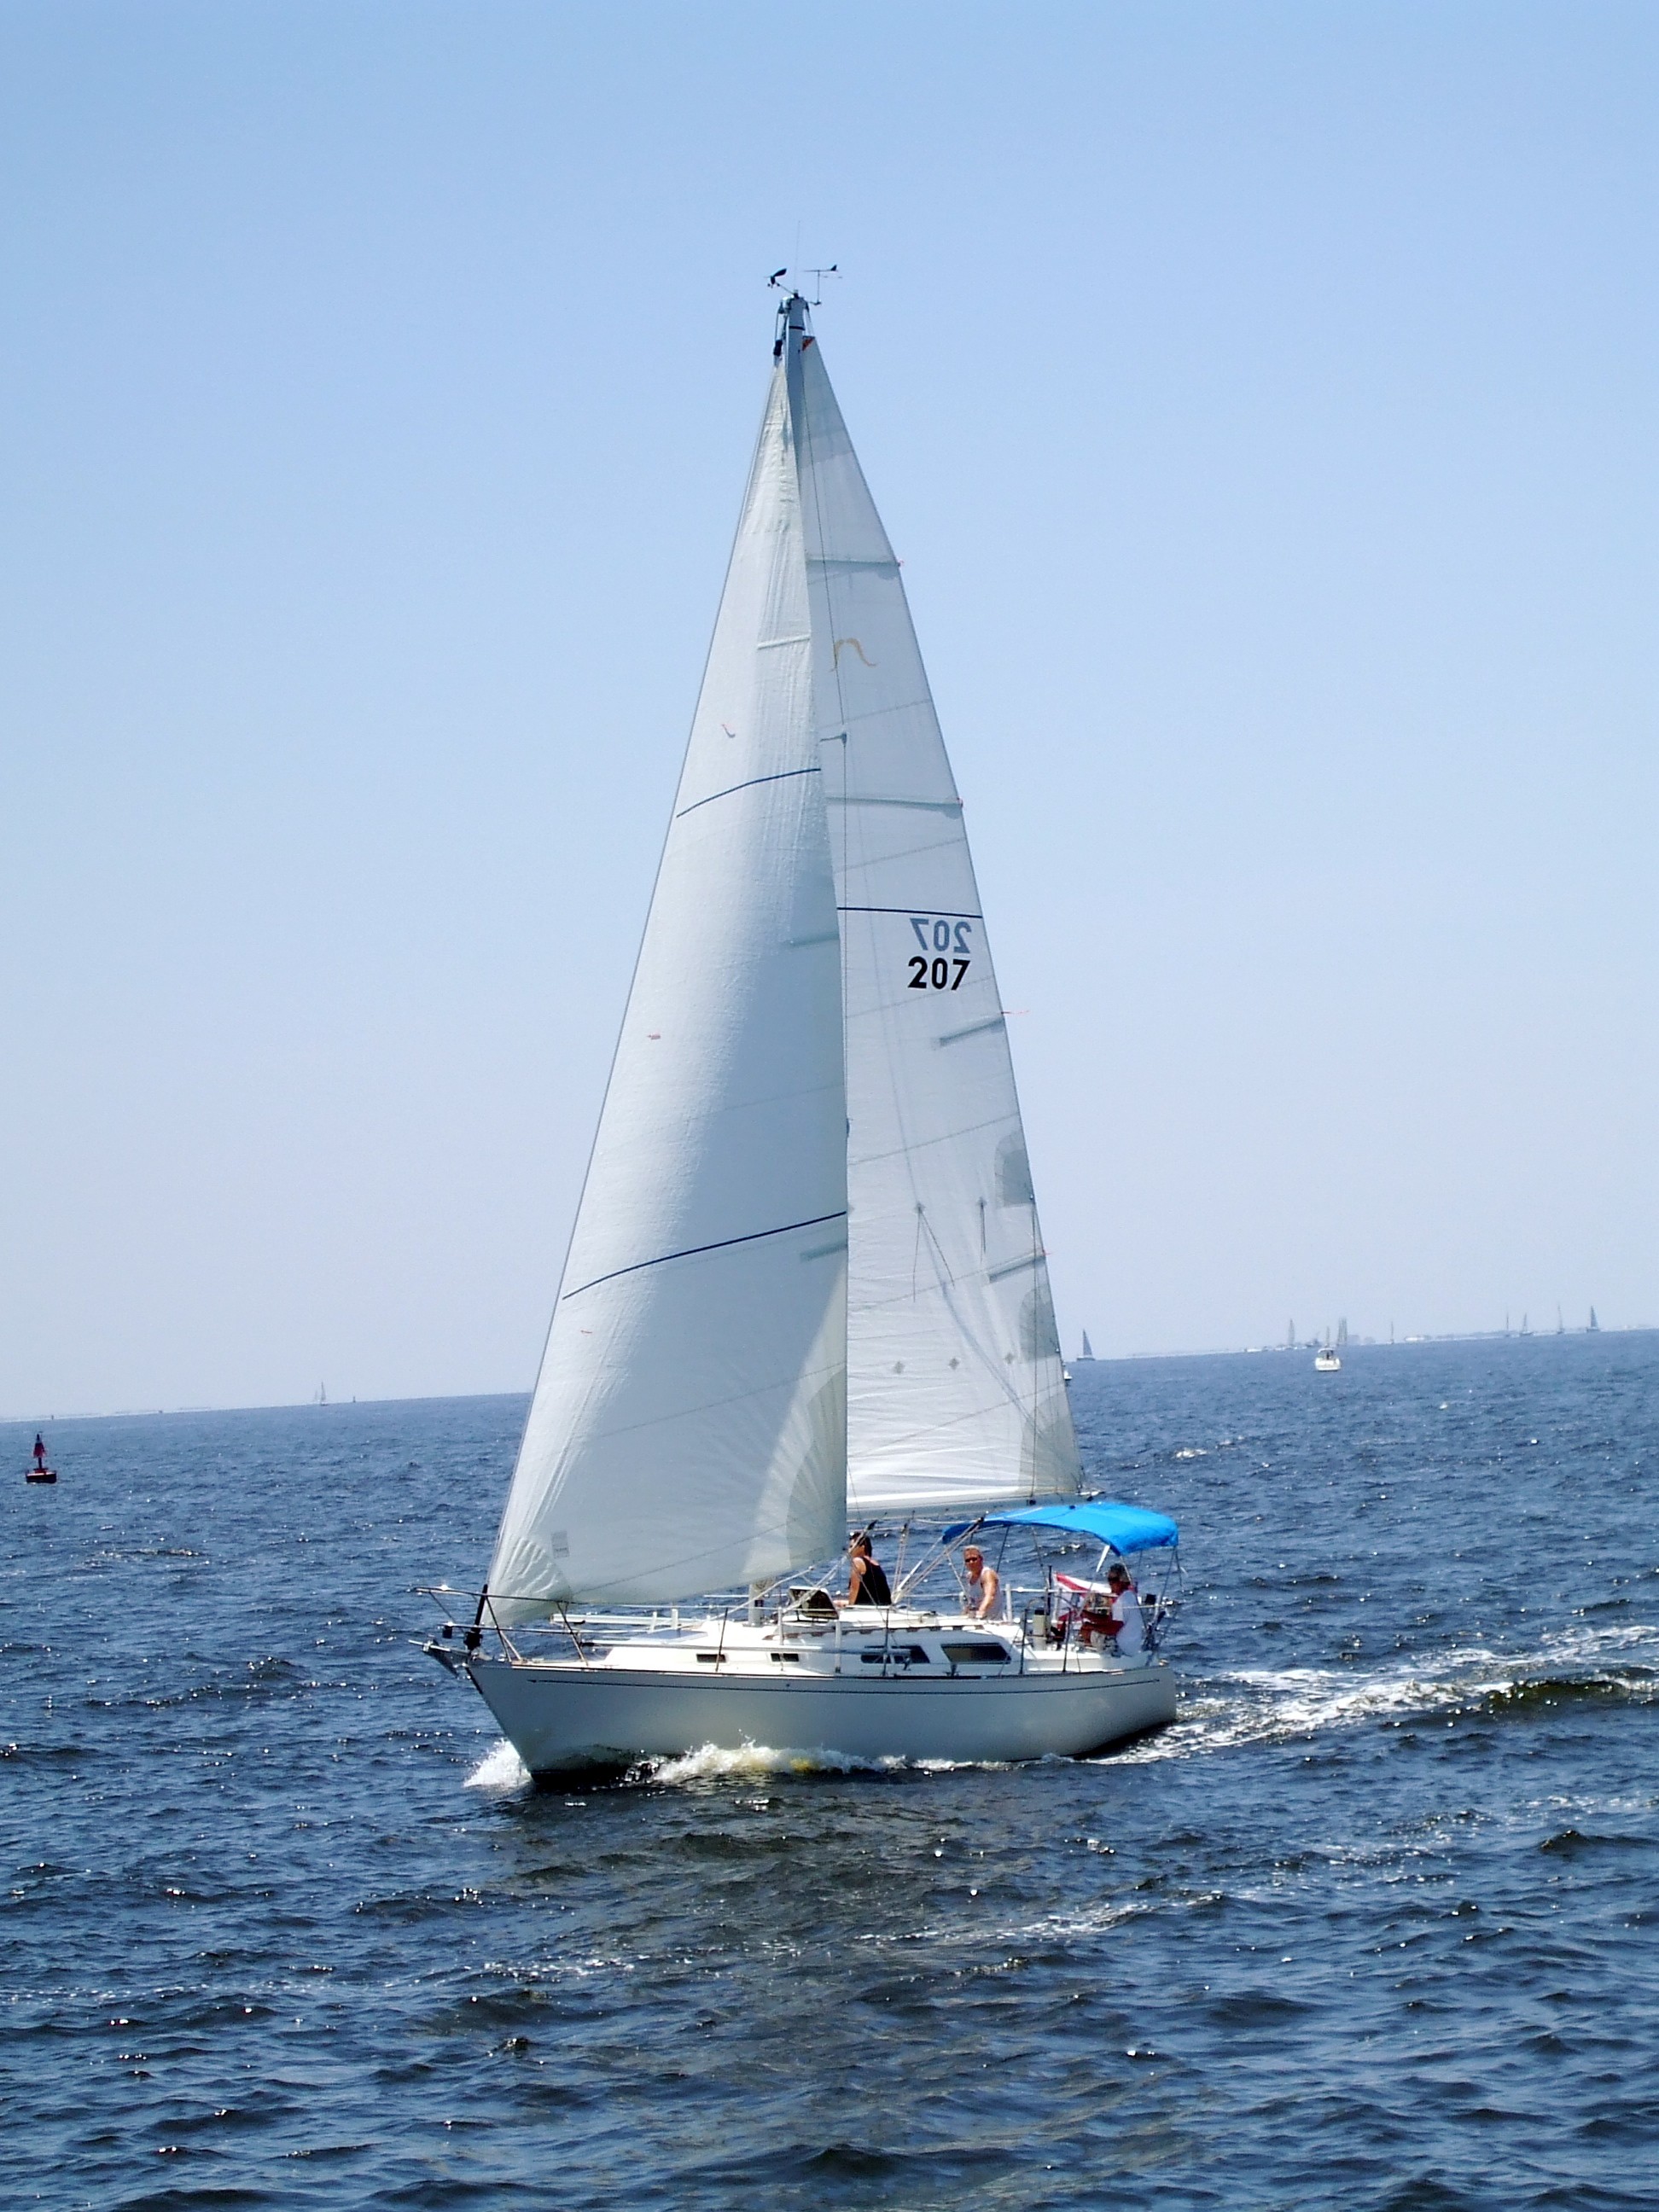 Sailboat | alwright1  -  Foter  -  CC BY 2.0